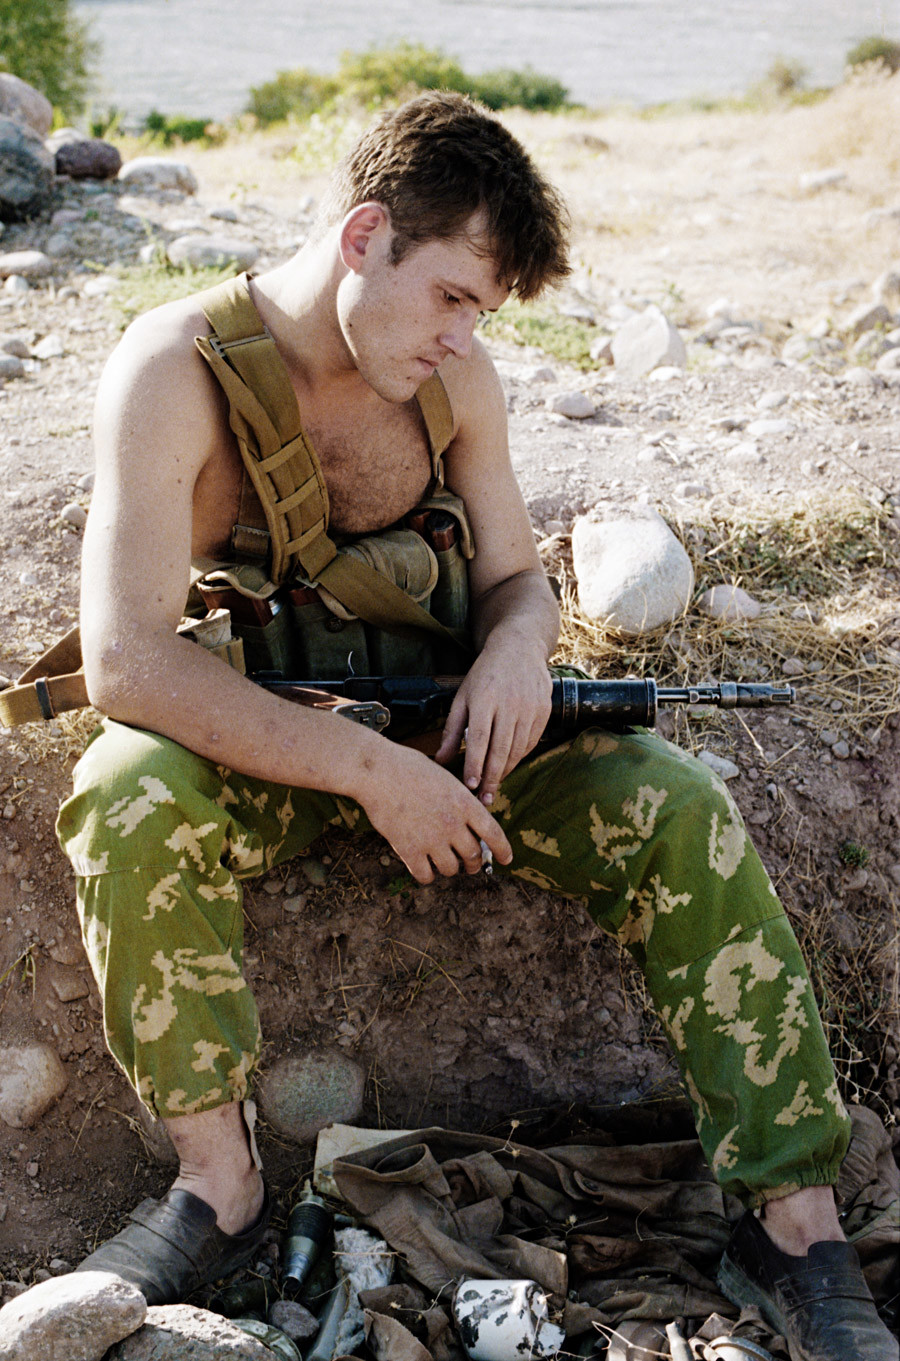 TAJIKISTAN. August 1, 1993. Frontier-soldier after a shootout at Tajik-Afghan border.